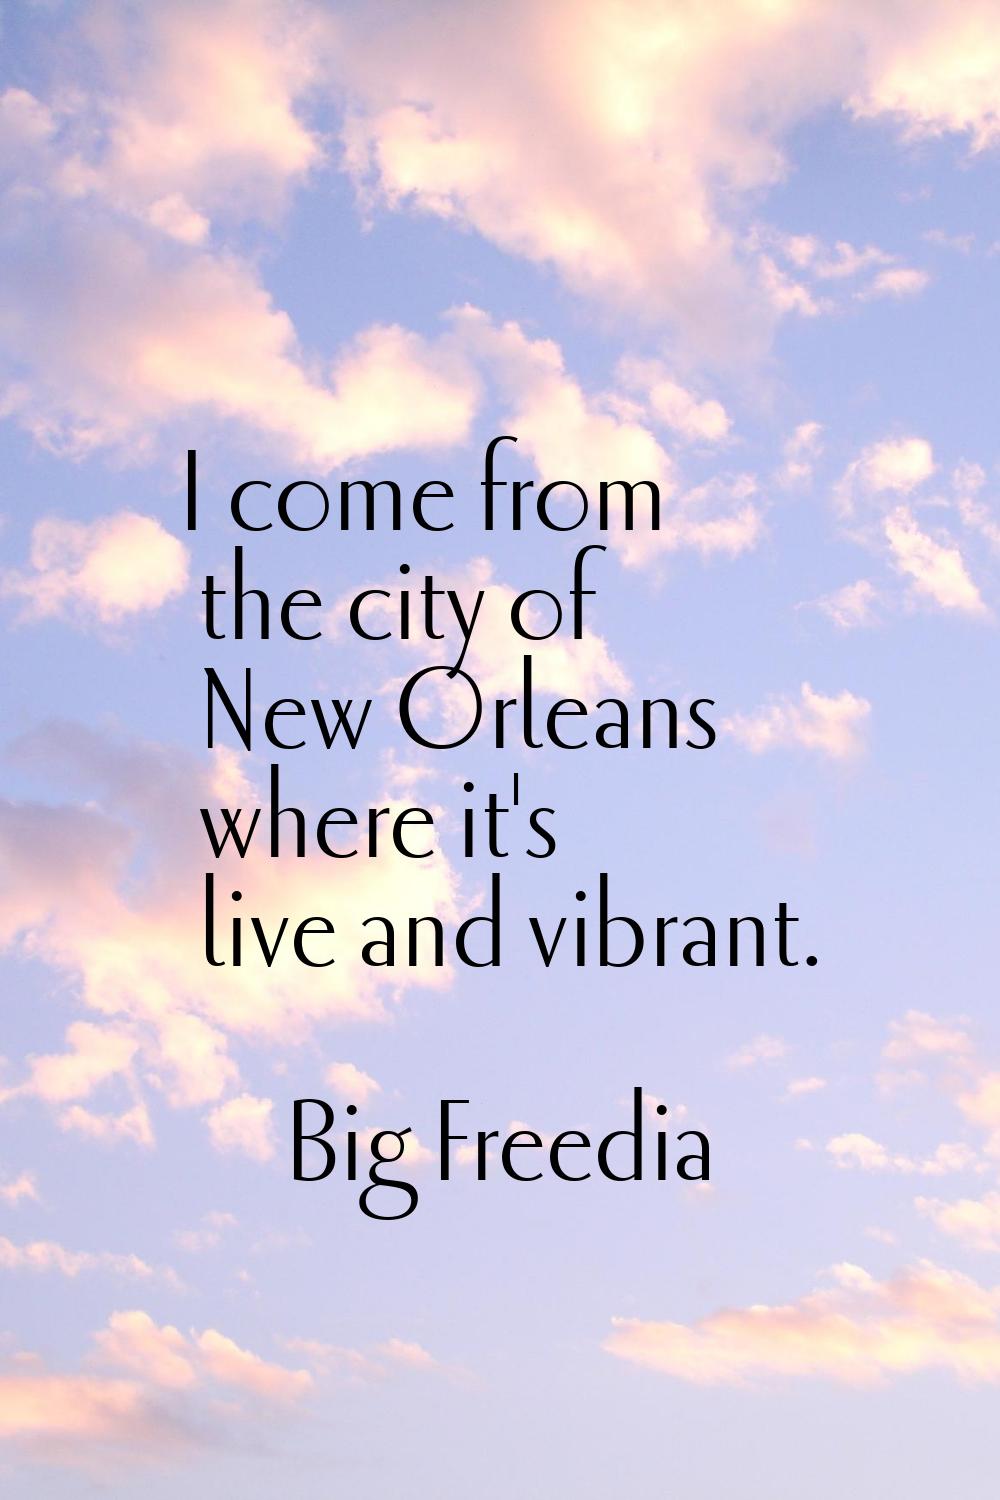 I come from the city of New Orleans where it's live and vibrant.